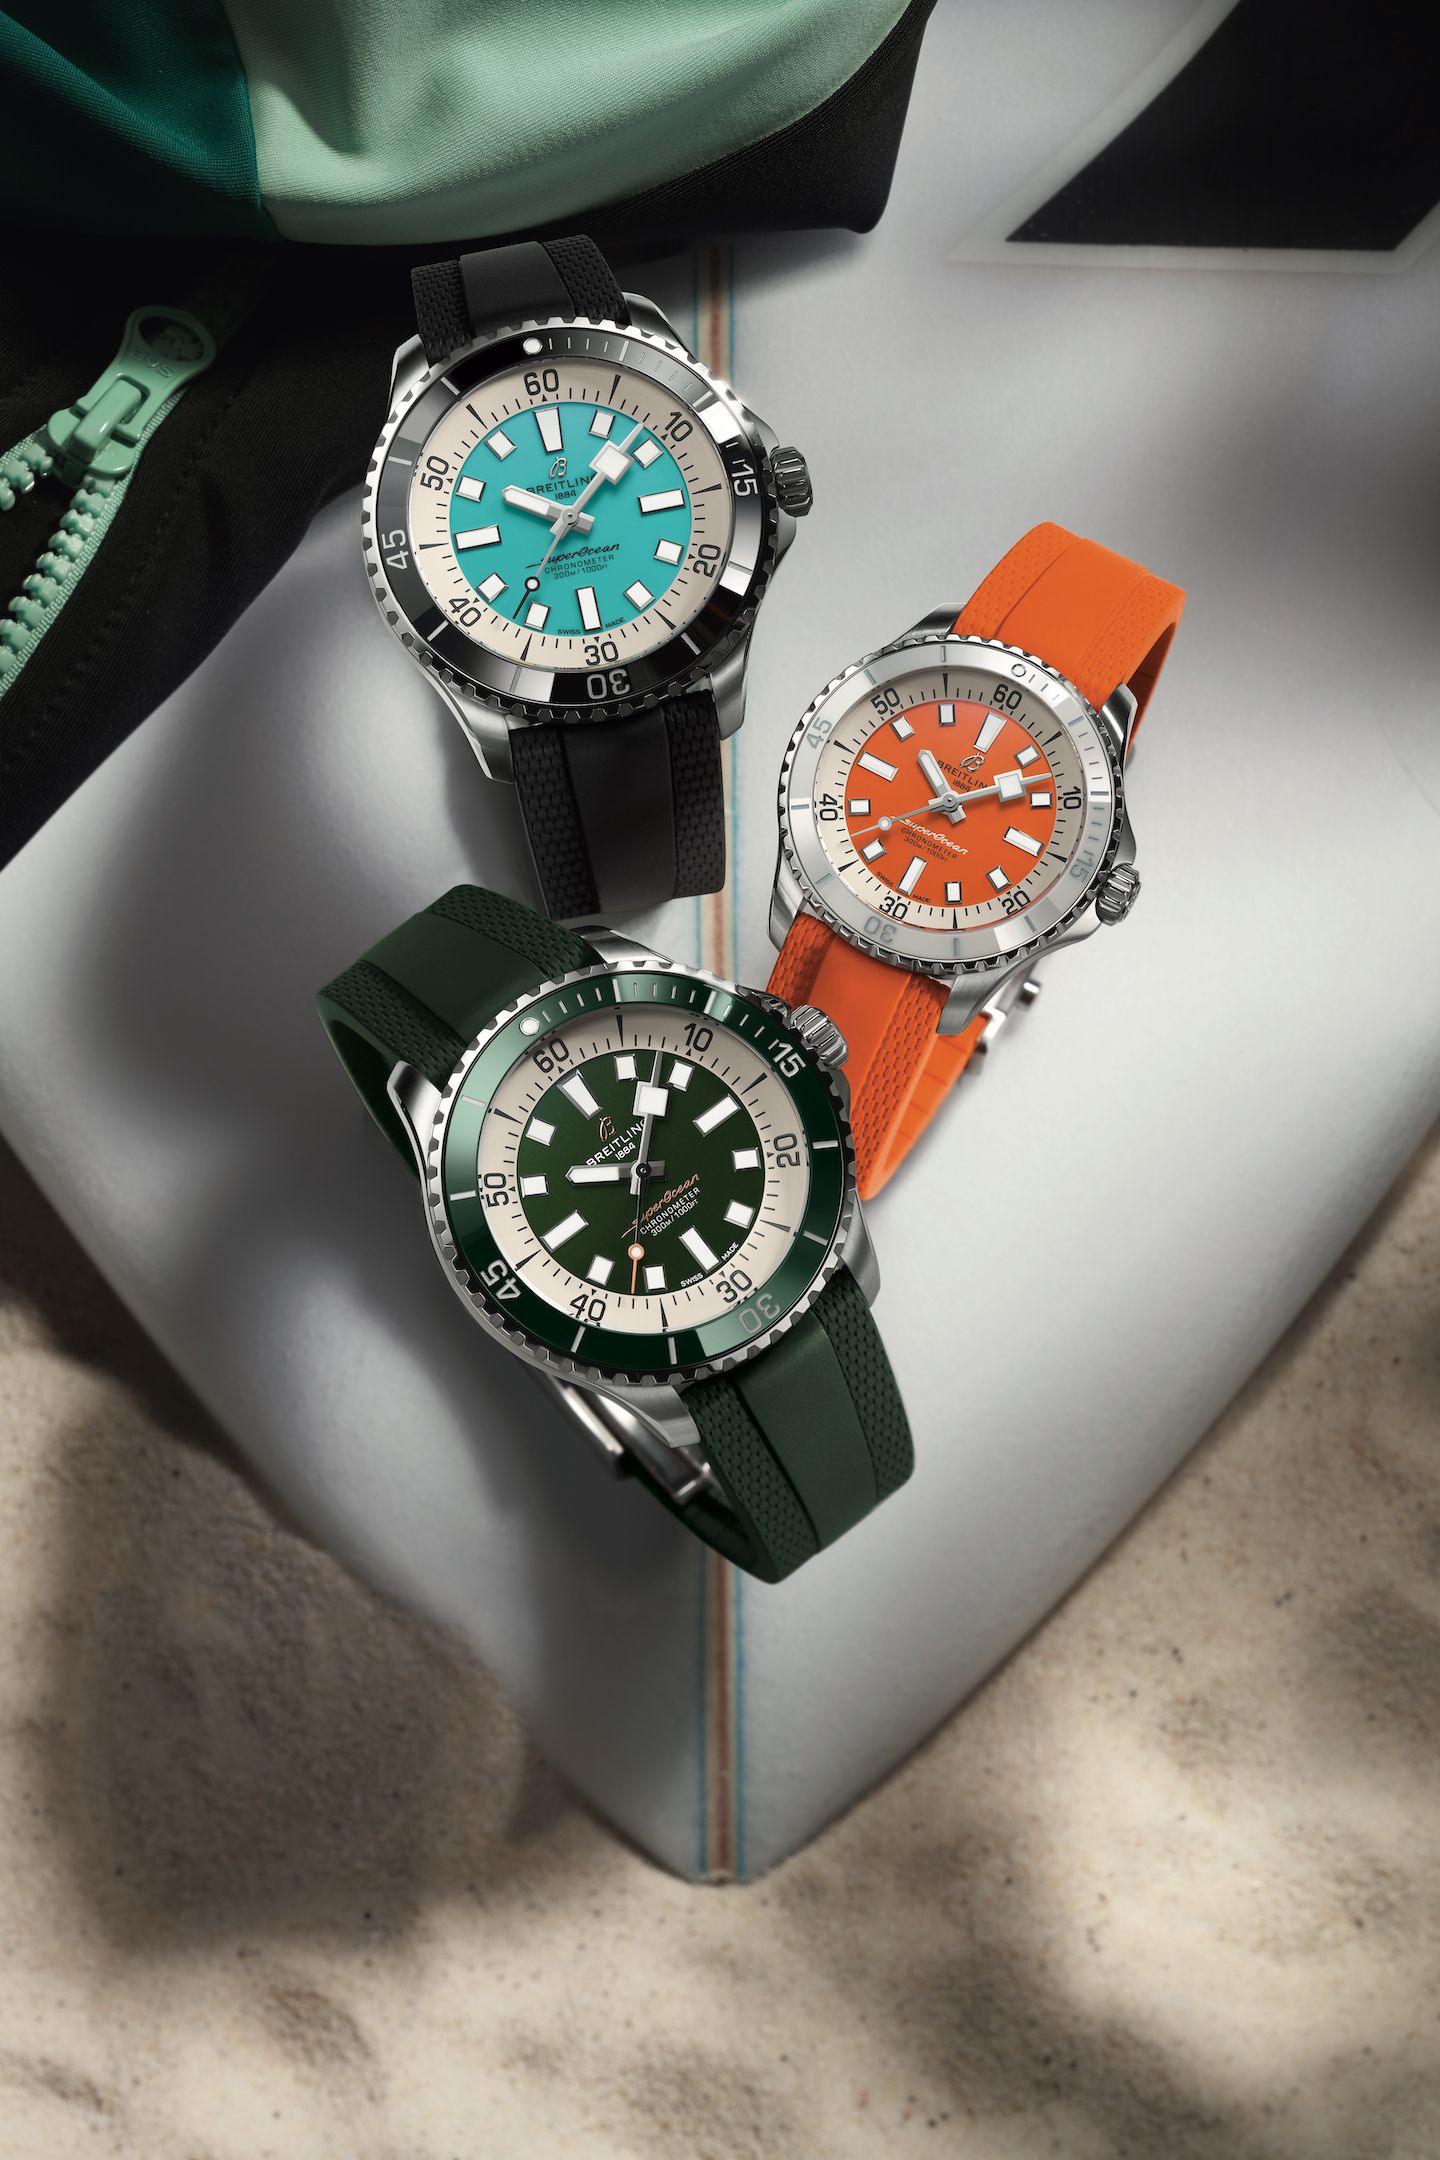 The new Breitling Superocean Collection_Ref. A17376211L2S1 (44 mm turquoise)_A17377211O1S1 (36 mm orange)_A17376A31L1S1 (44 mm green)